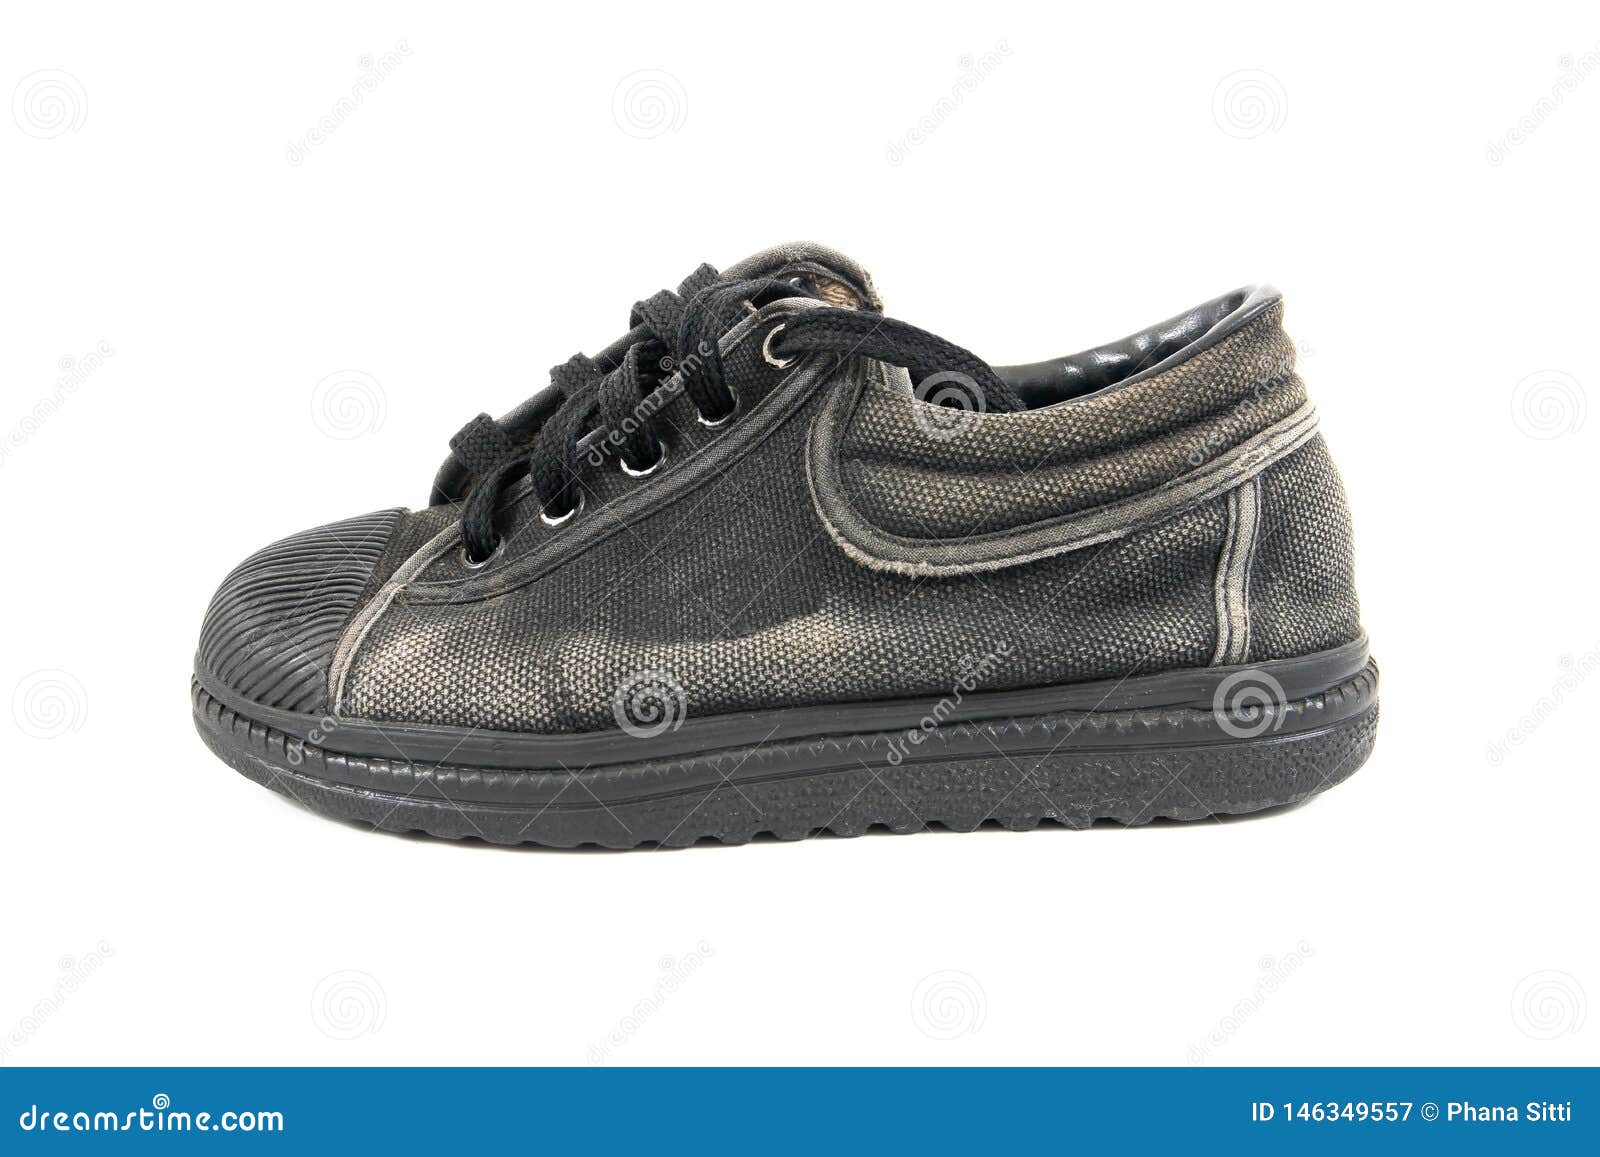 Black Old Cloth School Shoes Isolated 